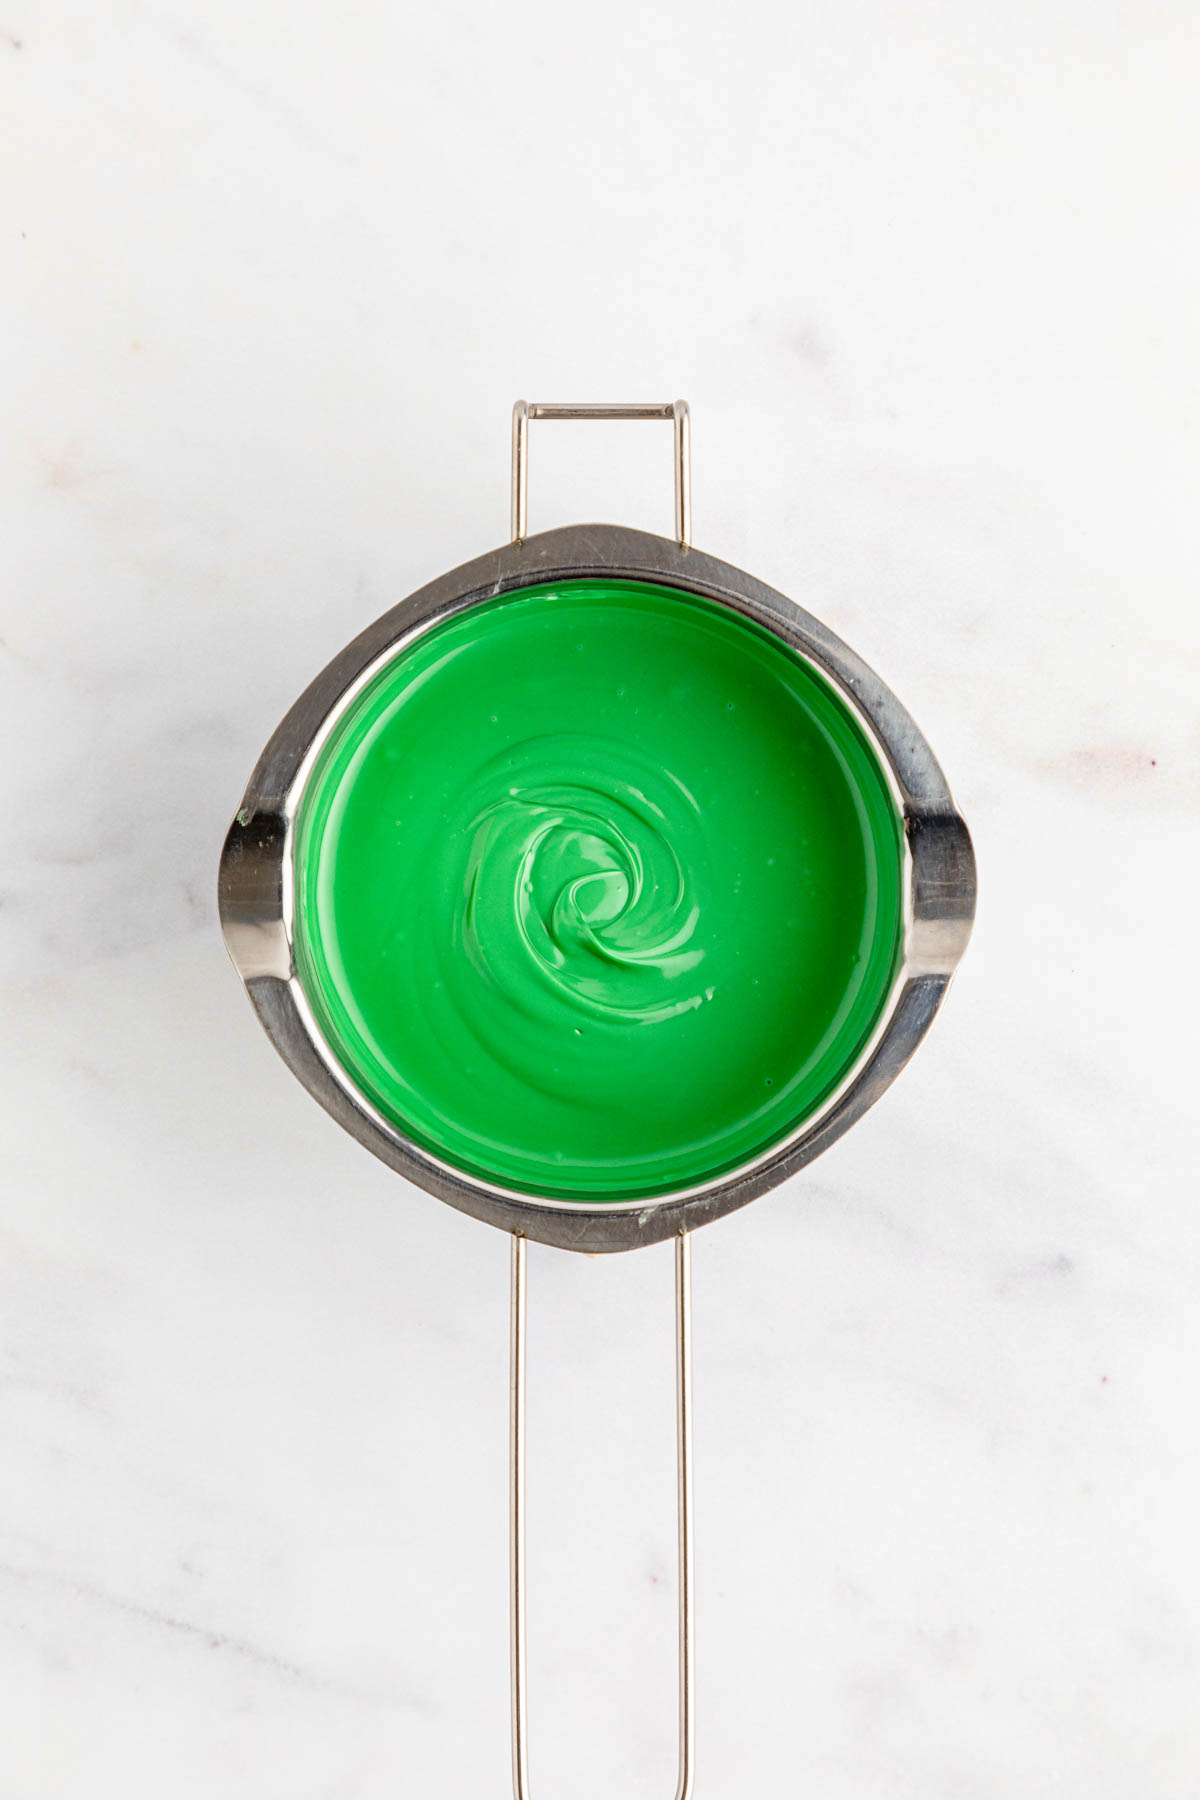 Green melted chocolate in a pan on a marble countertop.